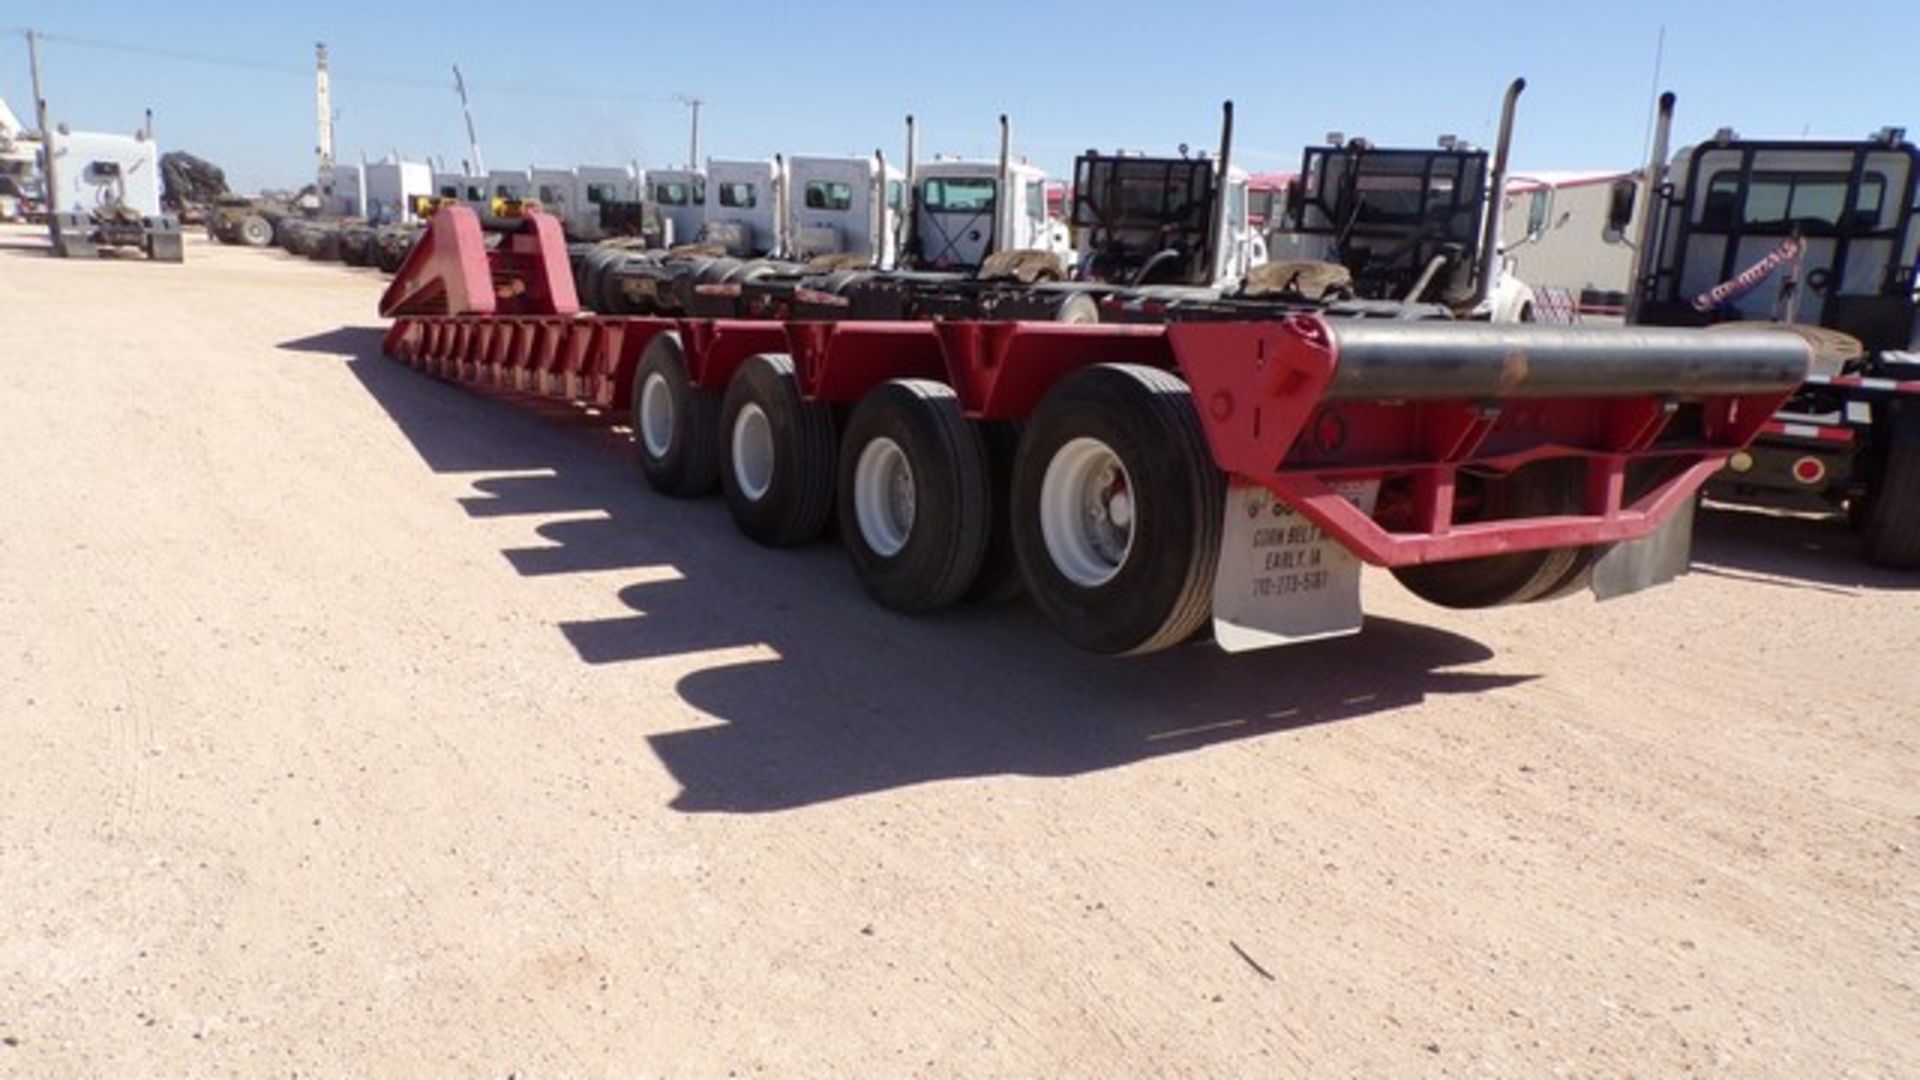 Located in YARD 1 - Midland, TX (6337) (X) 1982 HERCULES 40' 4 AXLE MANUAL RGN LOWBOY TRAILER, - Image 4 of 5